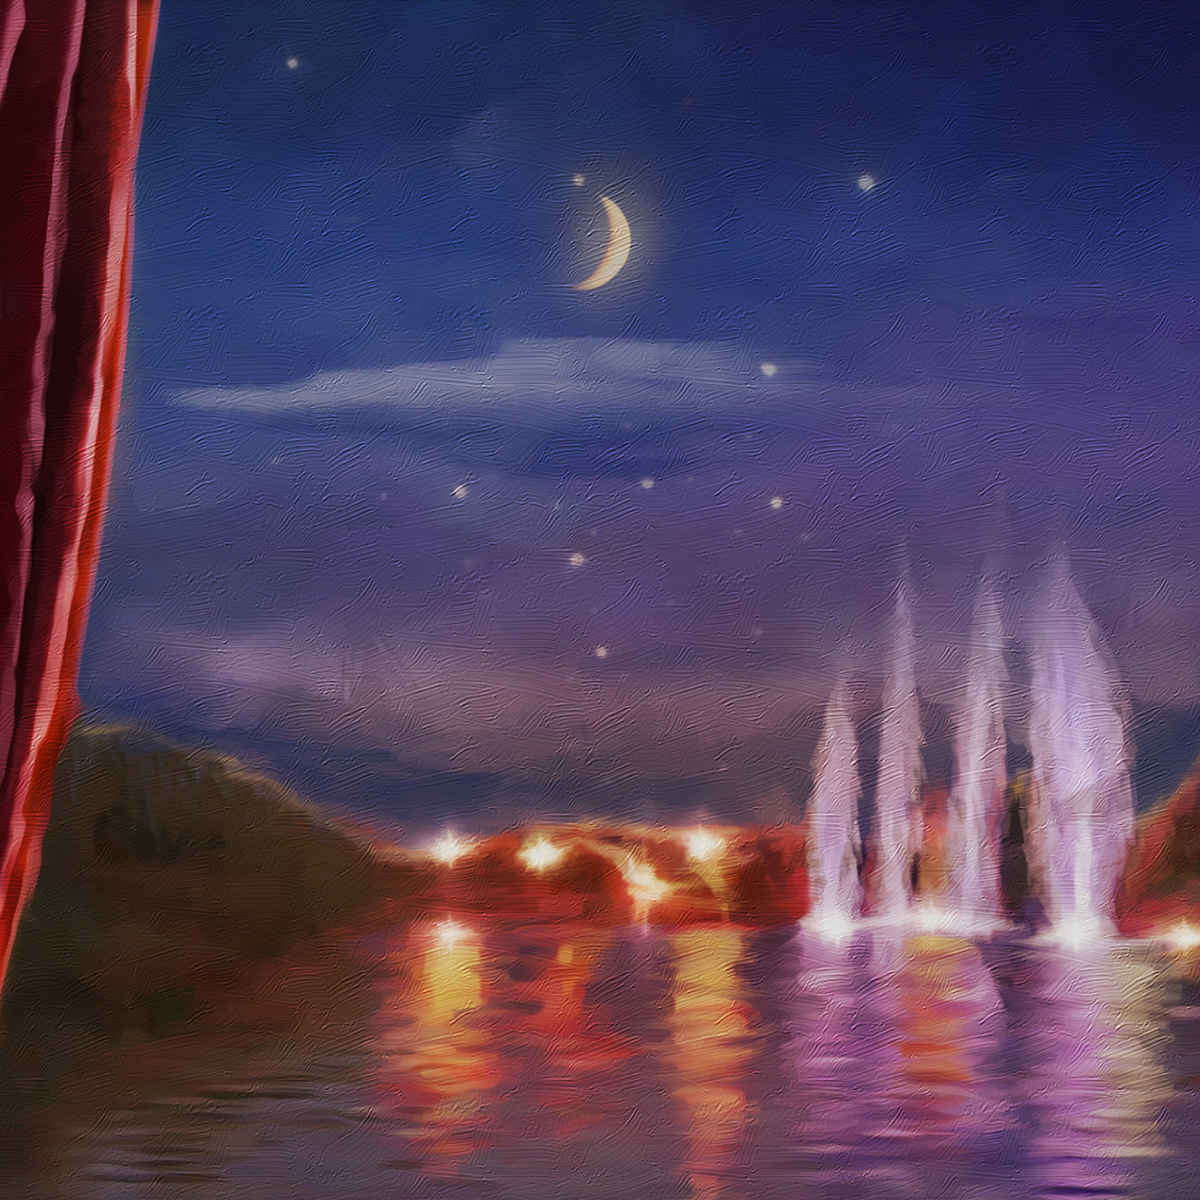 Digital Art  fairy lilies flaming lilies magic moon Night landscape night lights reflections in the water sinking boats surreal theatrical scenery